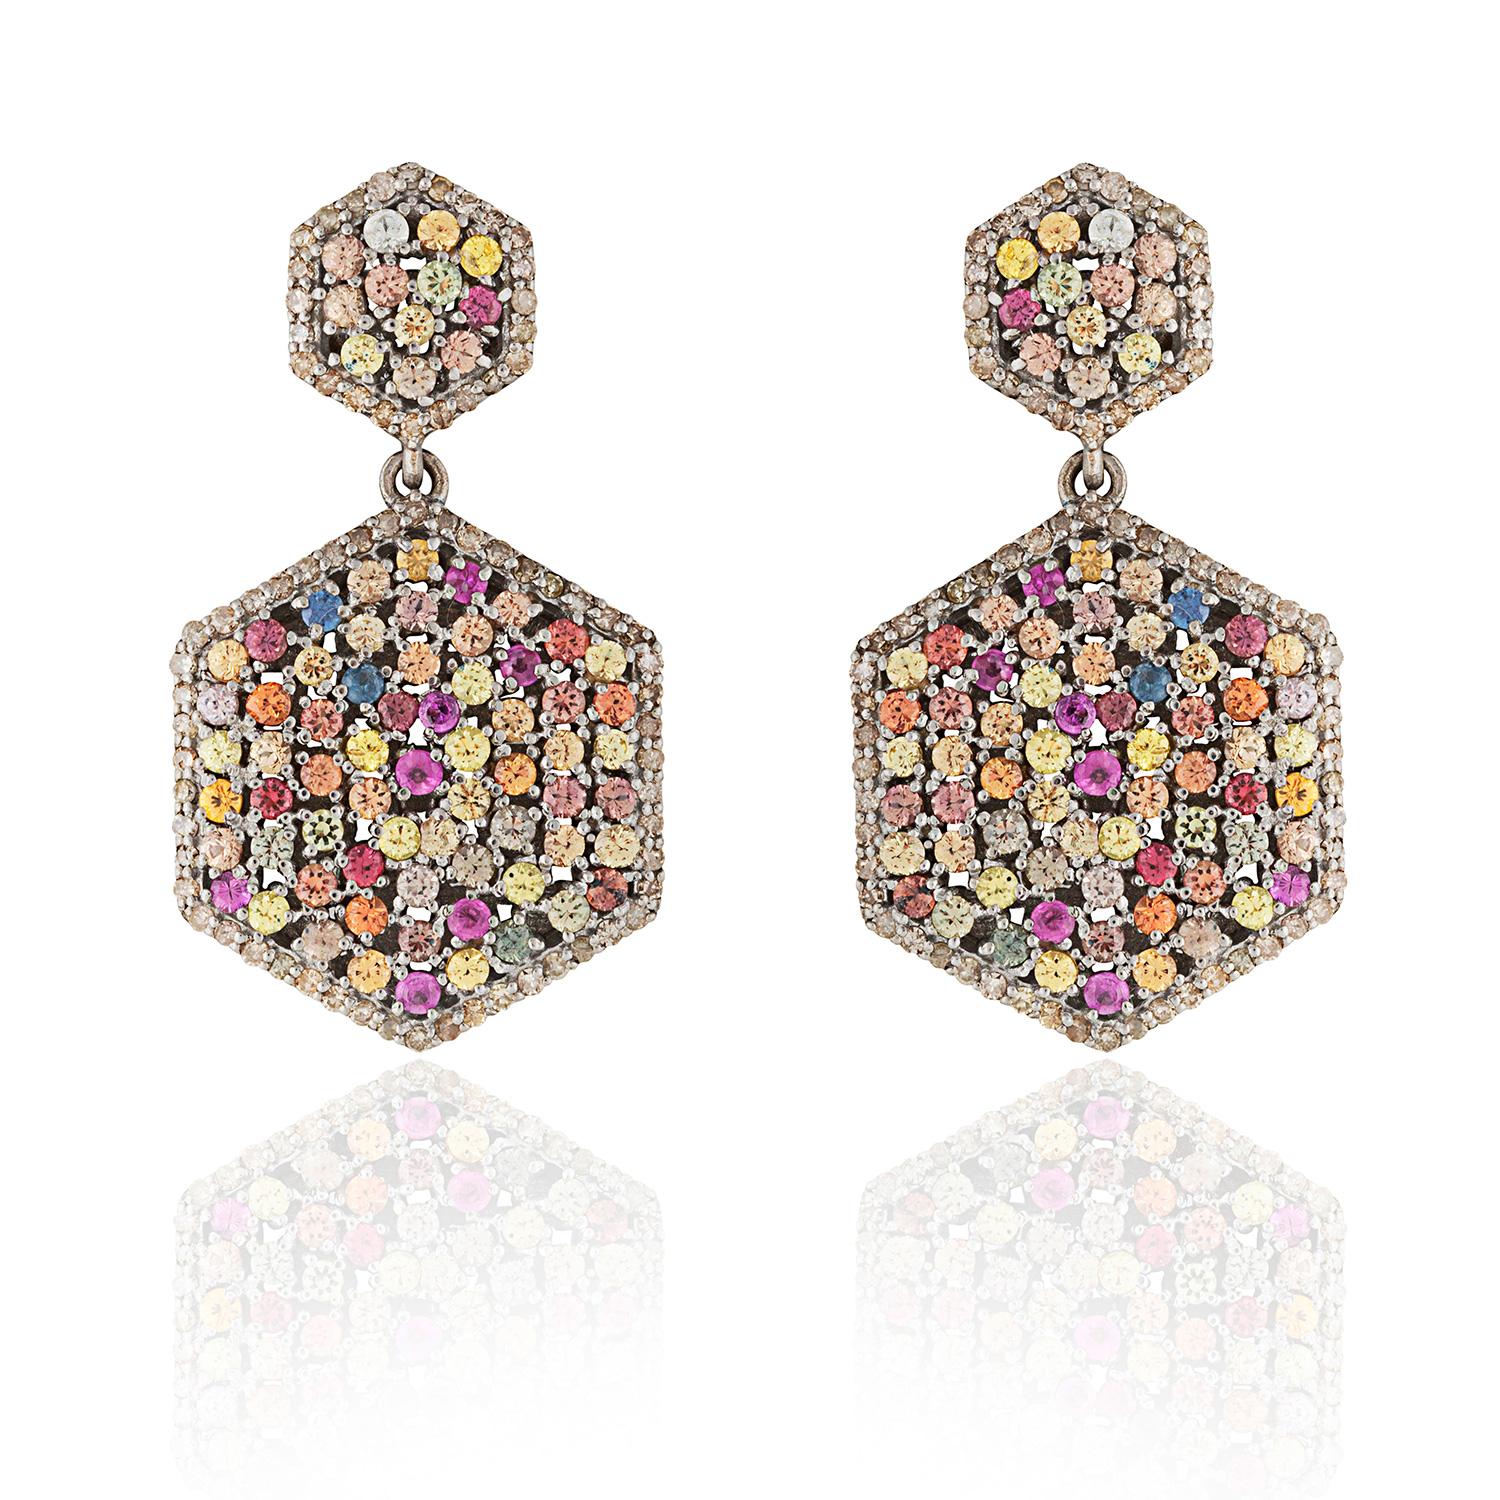 Consciously sourced multi coloured sapphires & single cut diamonds in a art deco hexagonal earring drop.  Consciously hand crafted for pierced ears.

Single cut diamonds; (1.23 carat); Multi Coloured Sapphire (5.11 carat) set on silver.

3 cm in